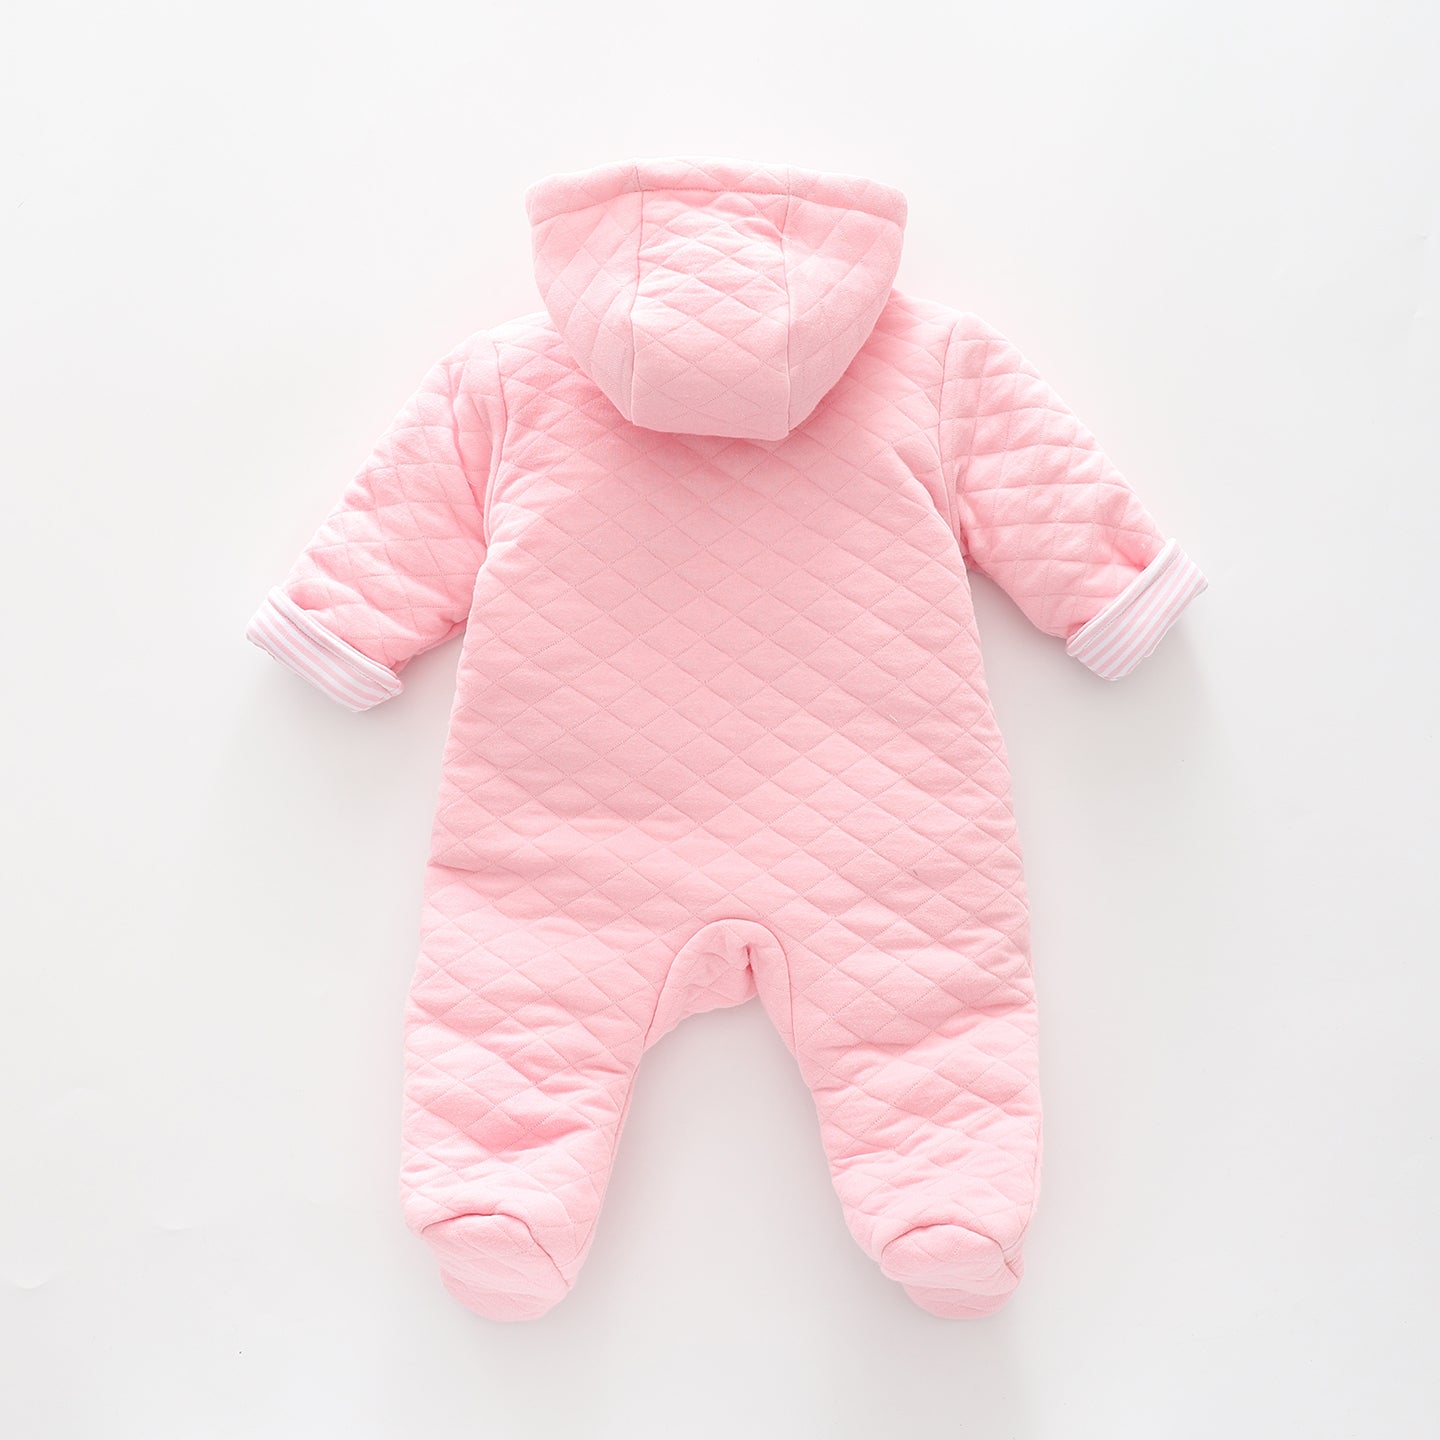 Pretty Pink, Baby Girls Snow Suit